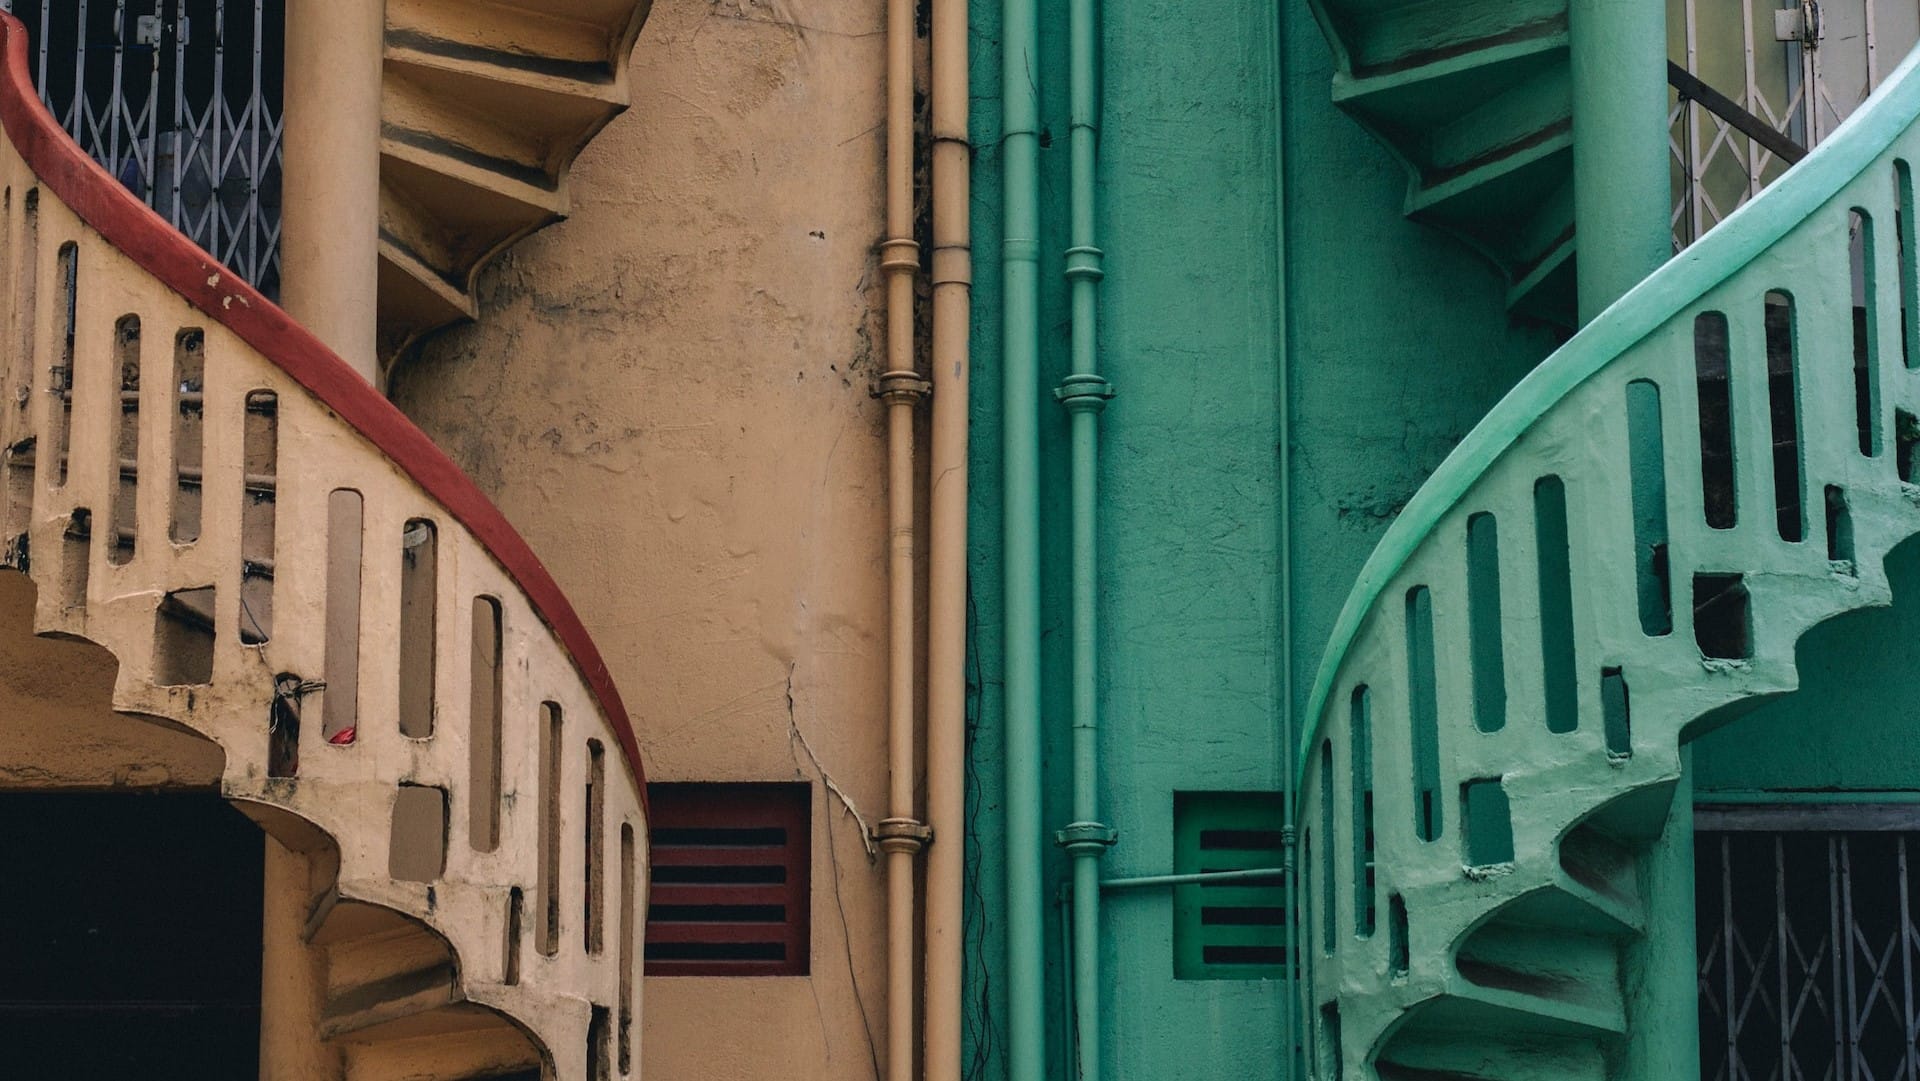 Image: Two staircases headed in opposite directions, one beige and one teal. Representing the way there can be two sides to one story.